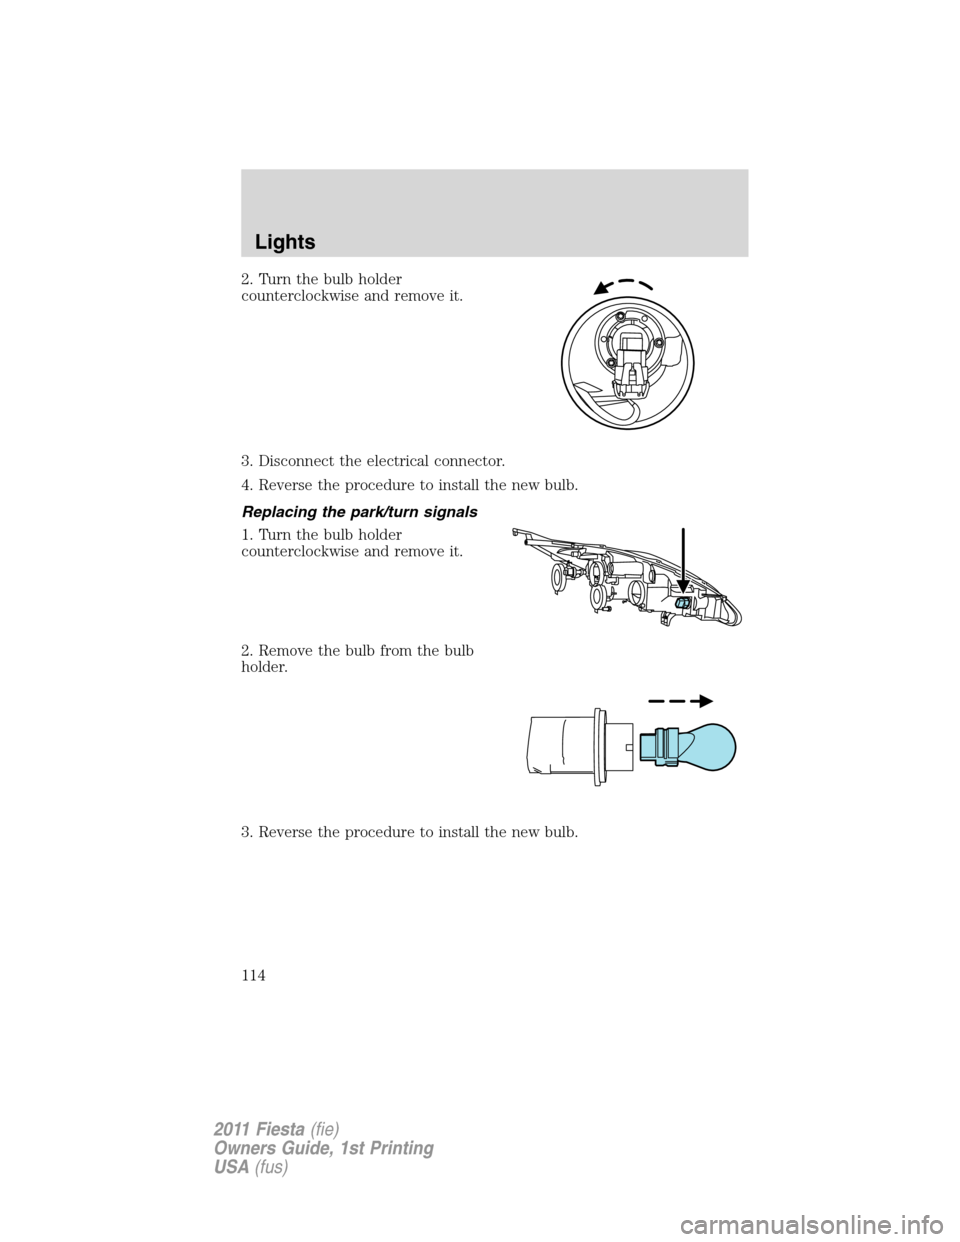 FORD FIESTA 2011 6.G Owners Manual 2. Turn the bulb holder
counterclockwise and remove it.
3. Disconnect the electrical connector.
4. Reverse the procedure to install the new bulb.
Replacing the park/turn signals
1. Turn the bulb holde